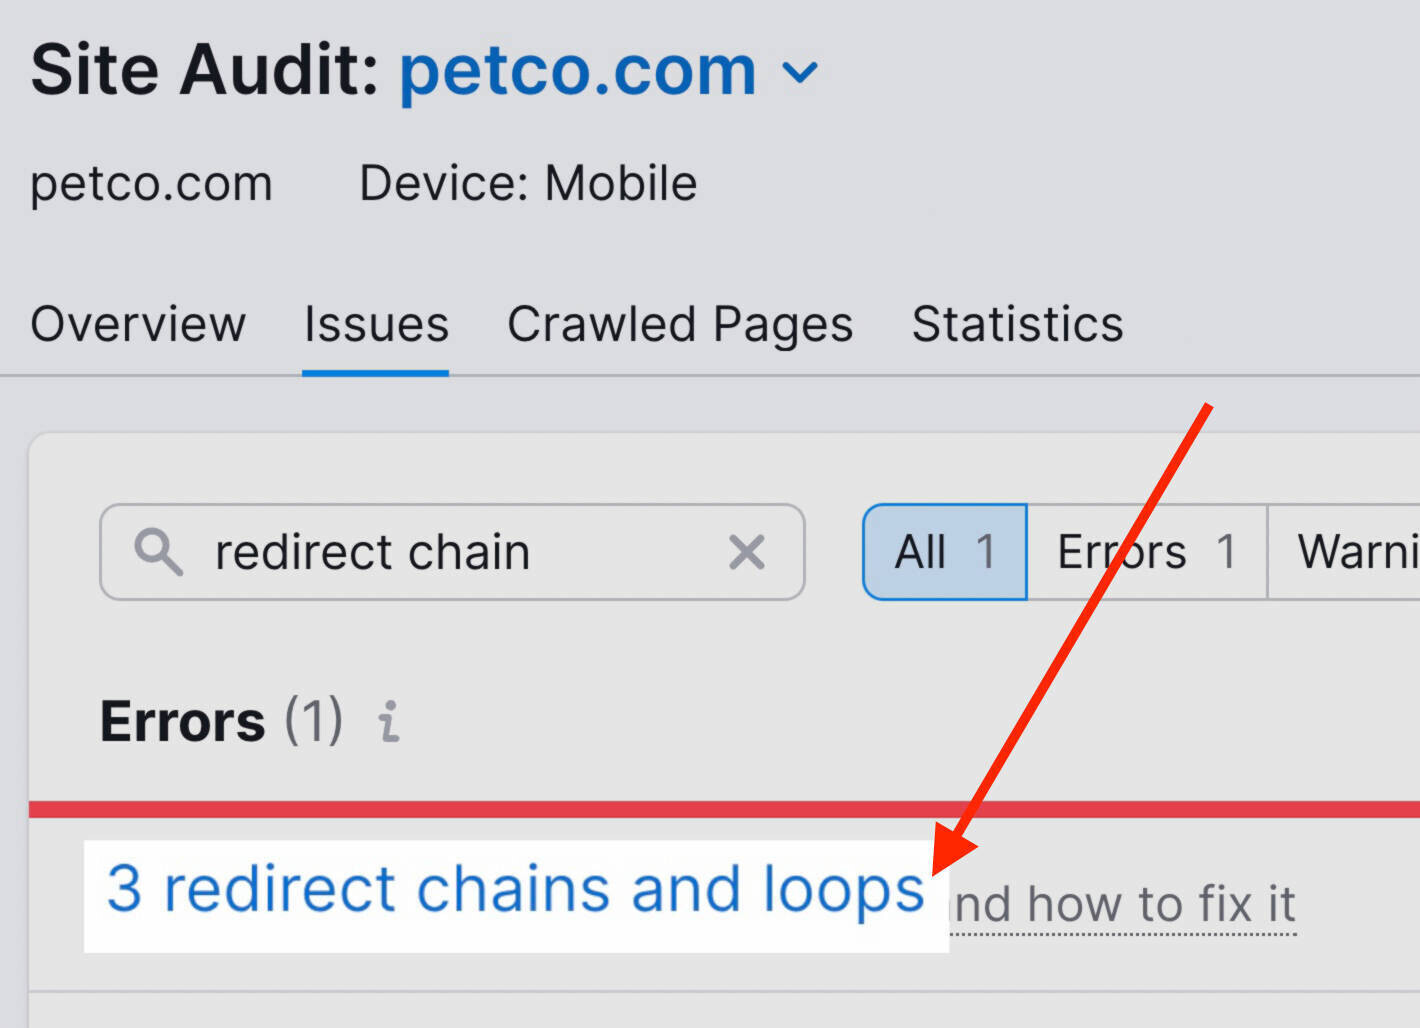 "3 redirect chains and loops” shown for "petco.com" project in Site Audit